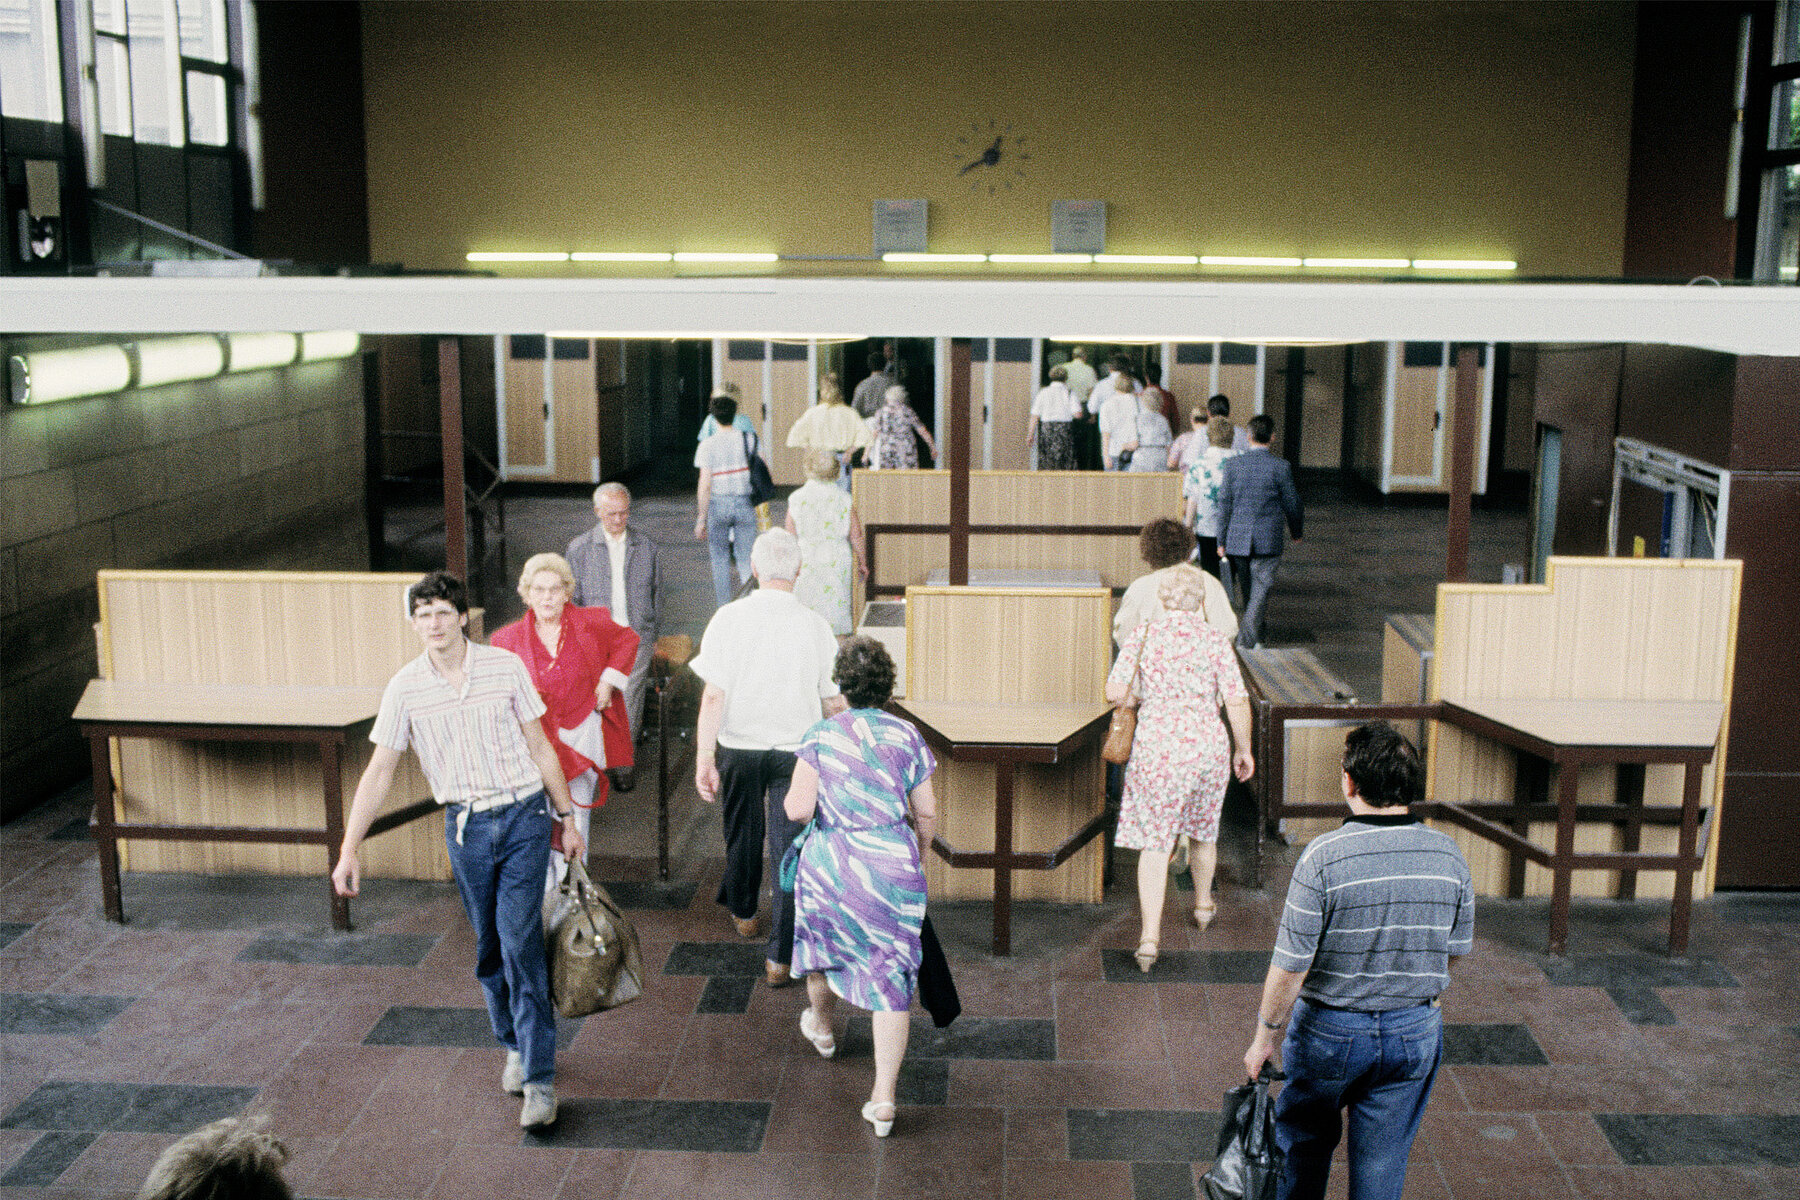 People pass through the border control checkpoint in the entrance hall.